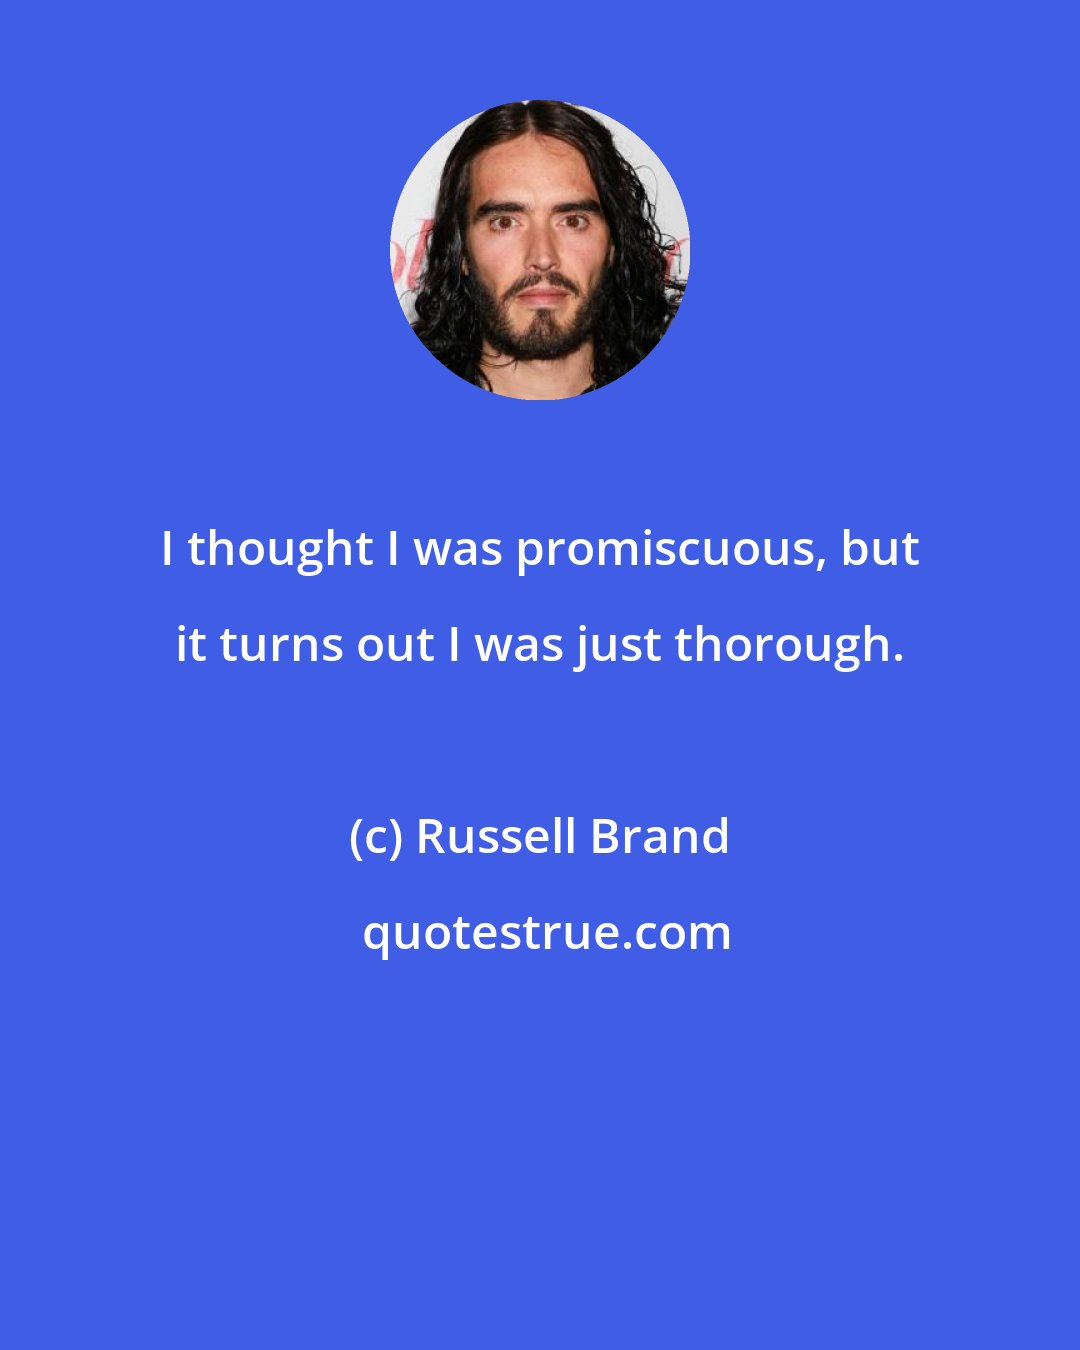 Russell Brand: I thought I was promiscuous, but it turns out I was just thorough.